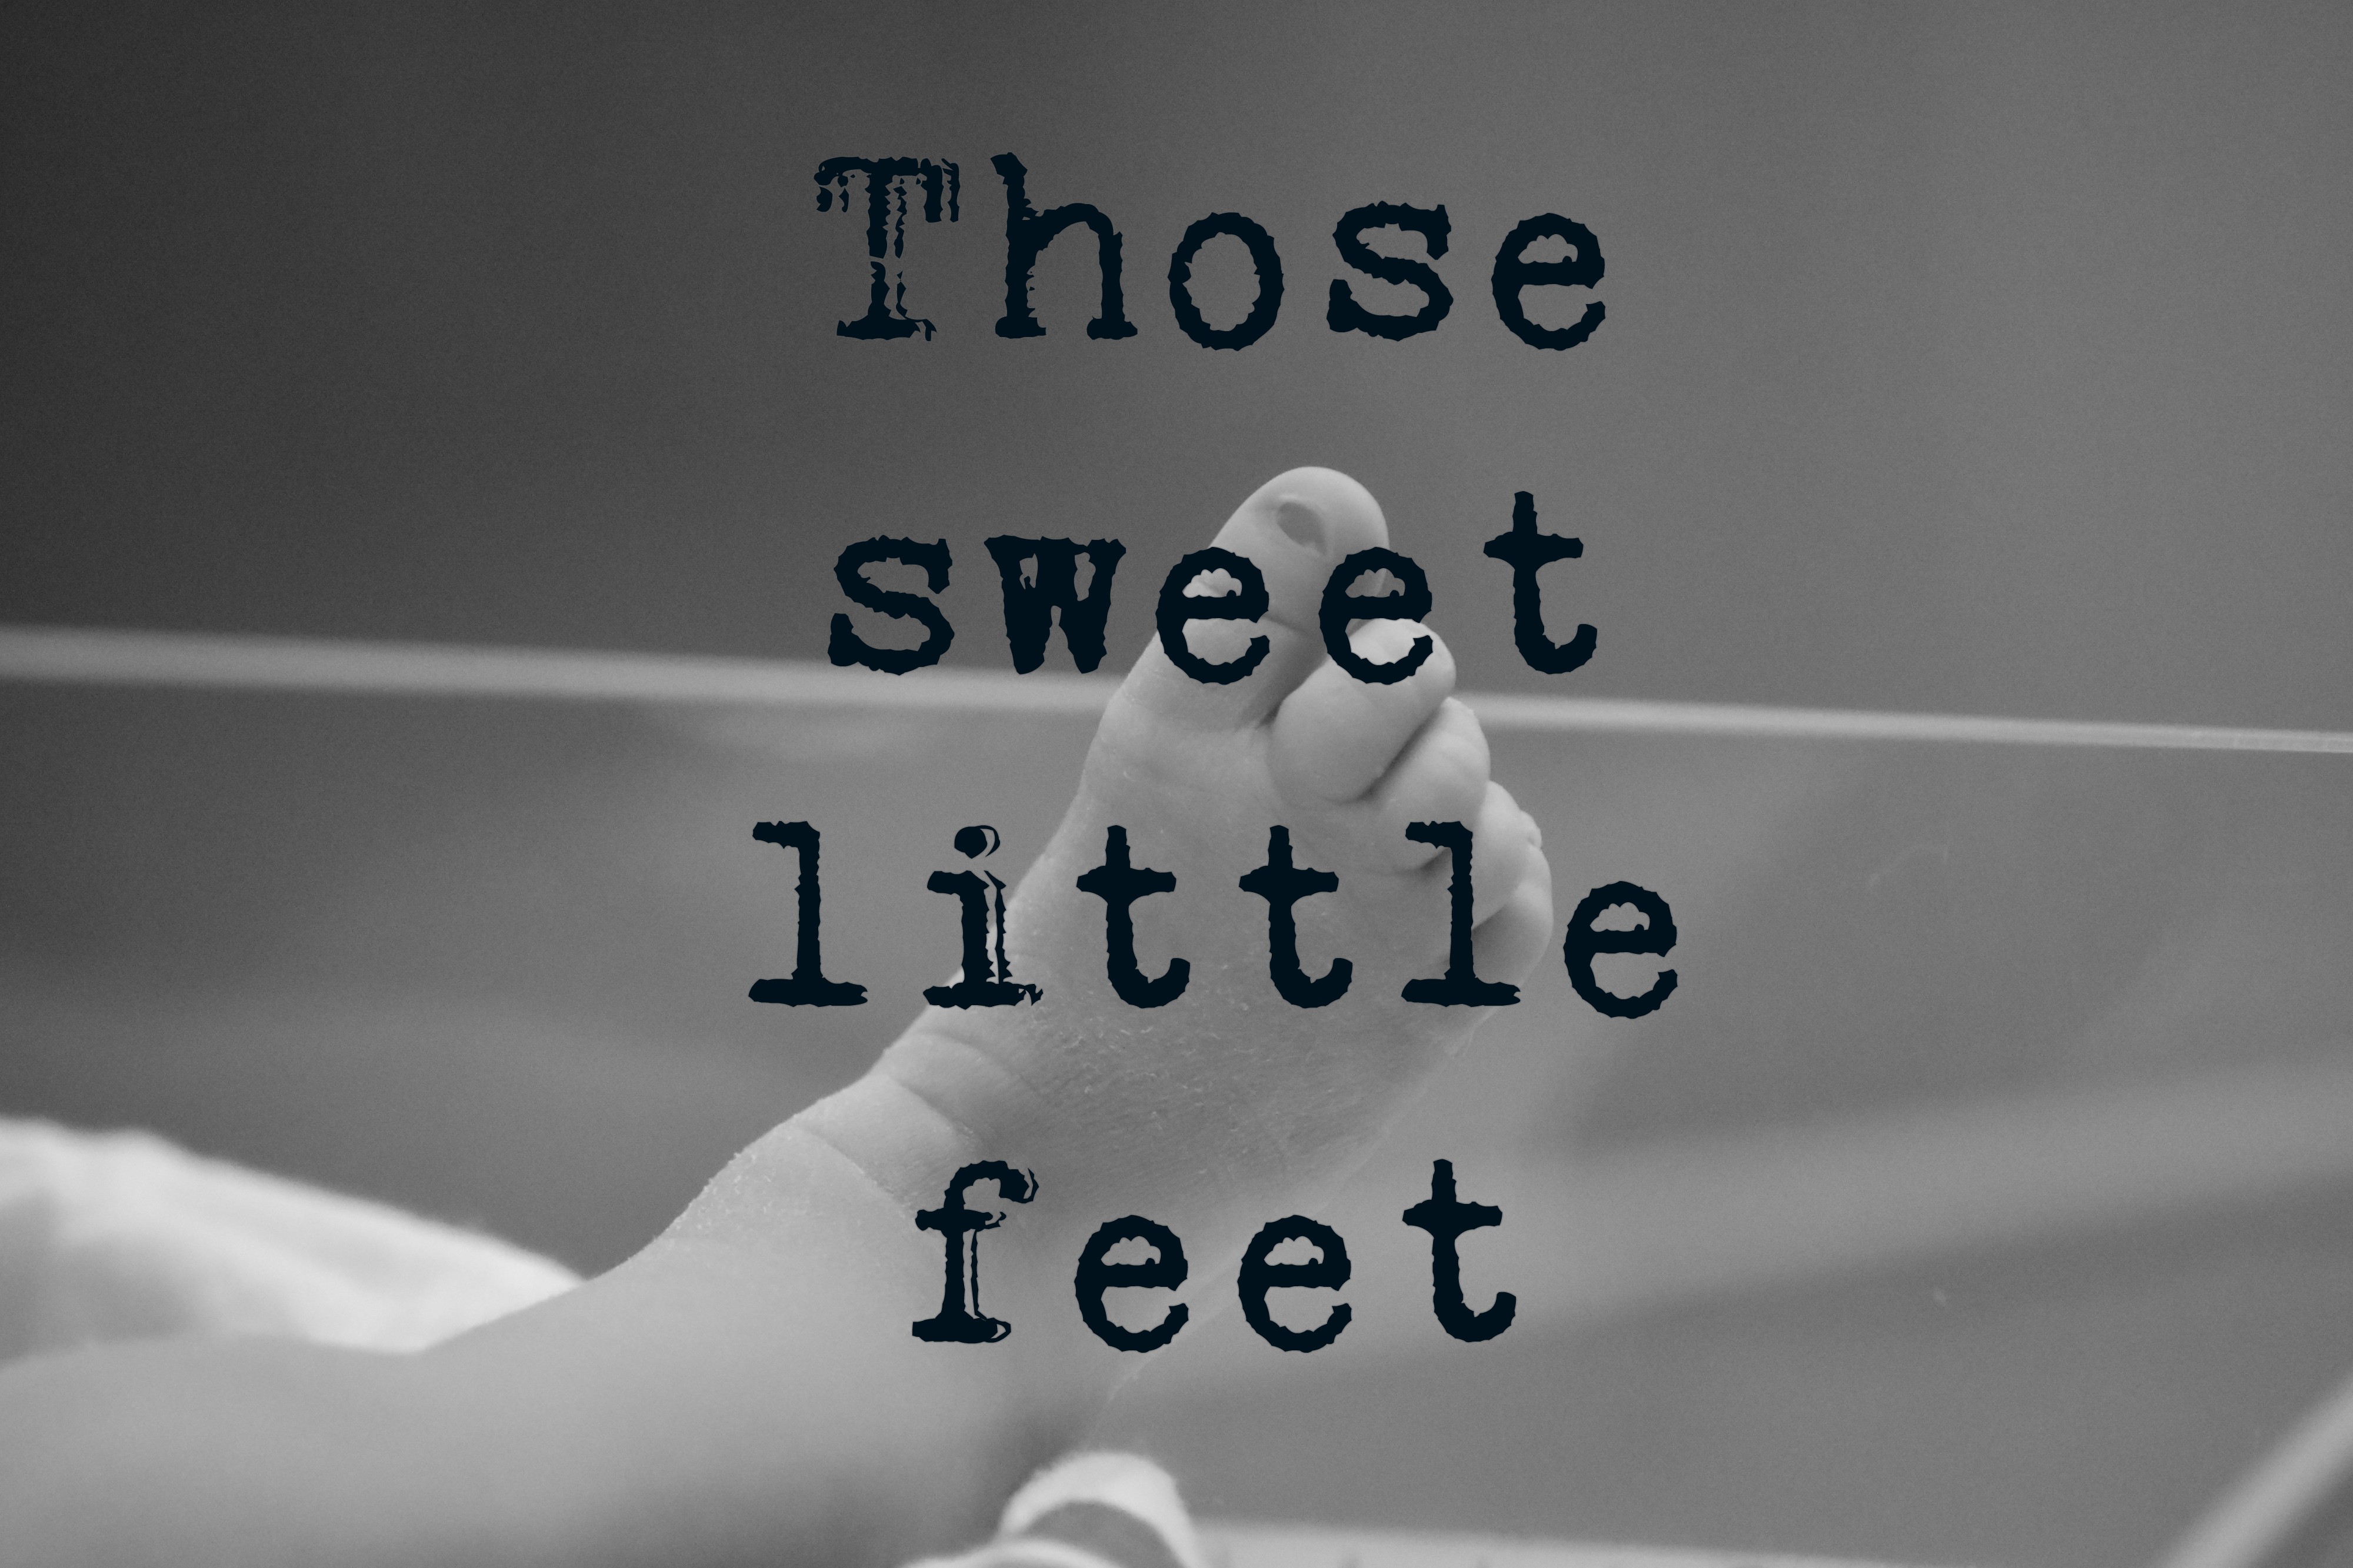 Those sweet little feet – Pray, Pursue, and Persist